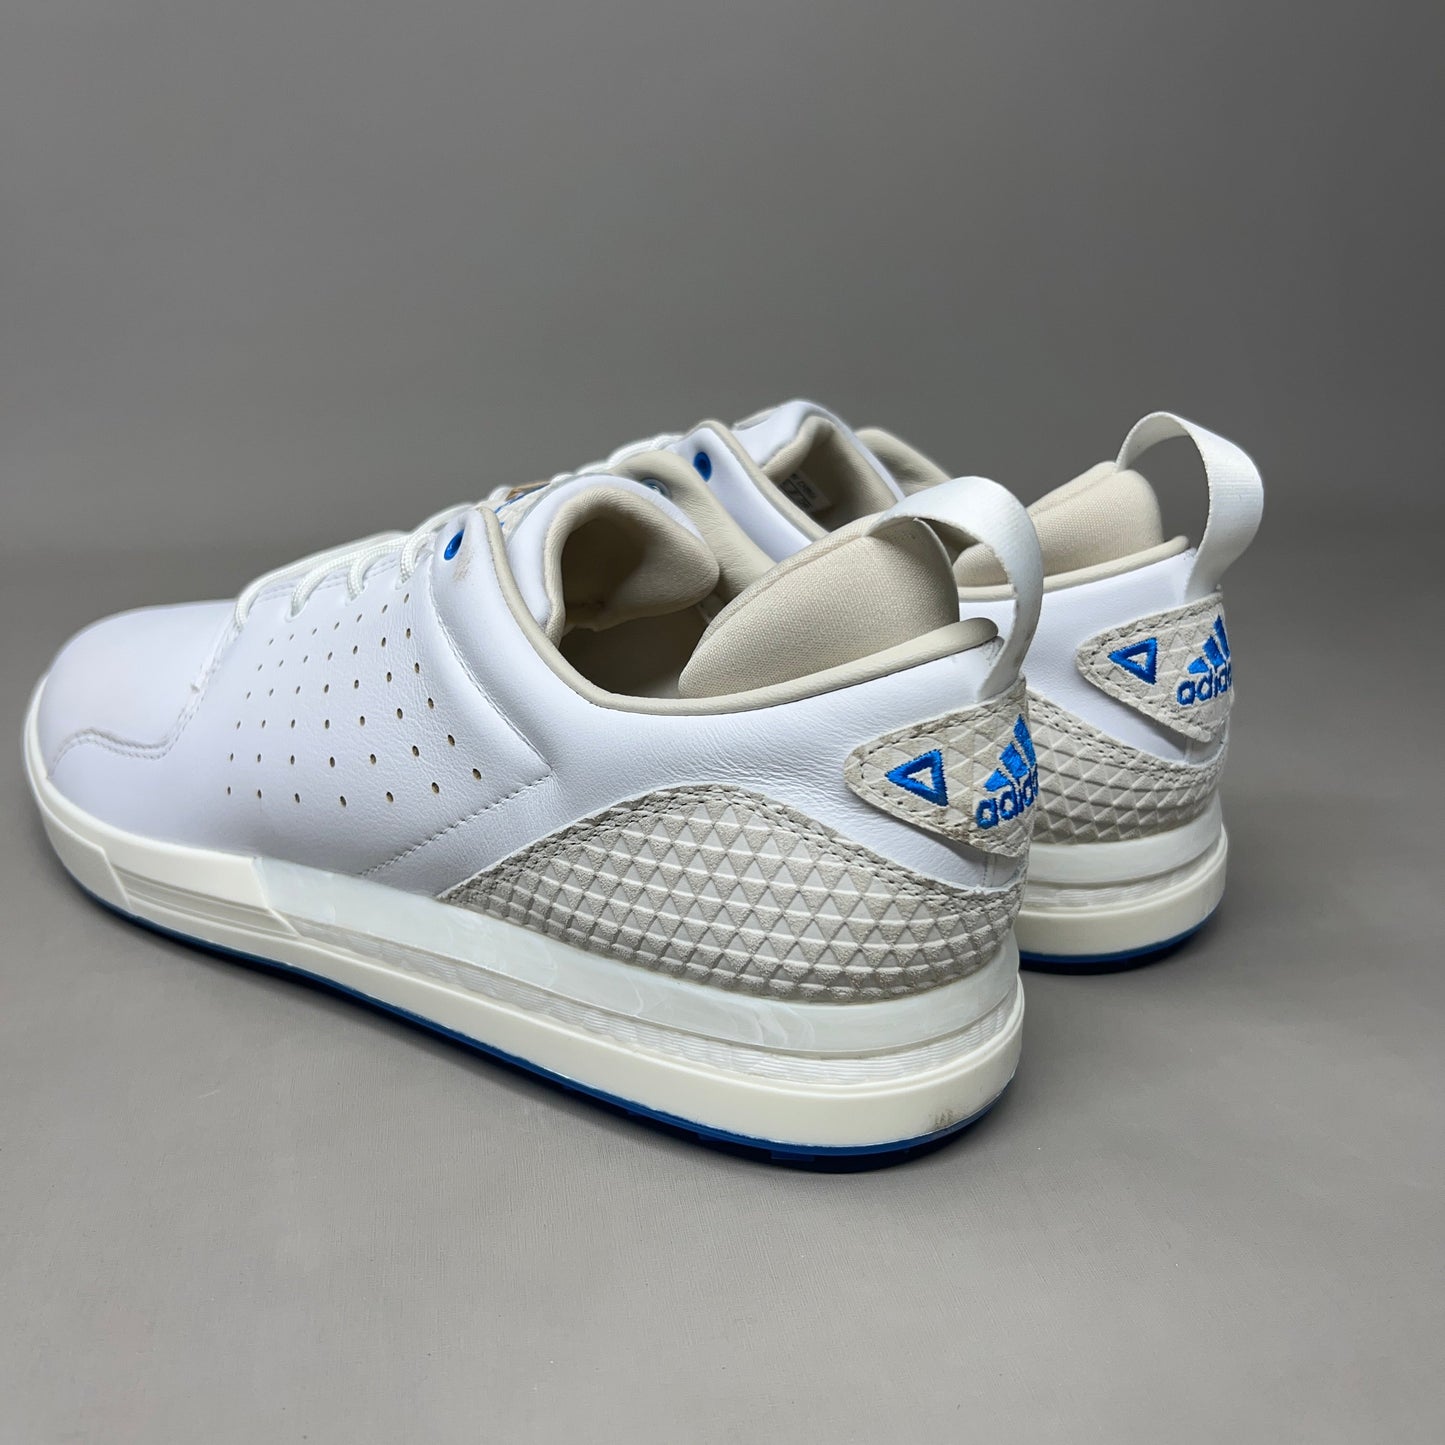 ADIDAS Flopshot Golf Shoes Waterproof Leather Men's Sz 13 White / Gold / Blue GV9668 (New)